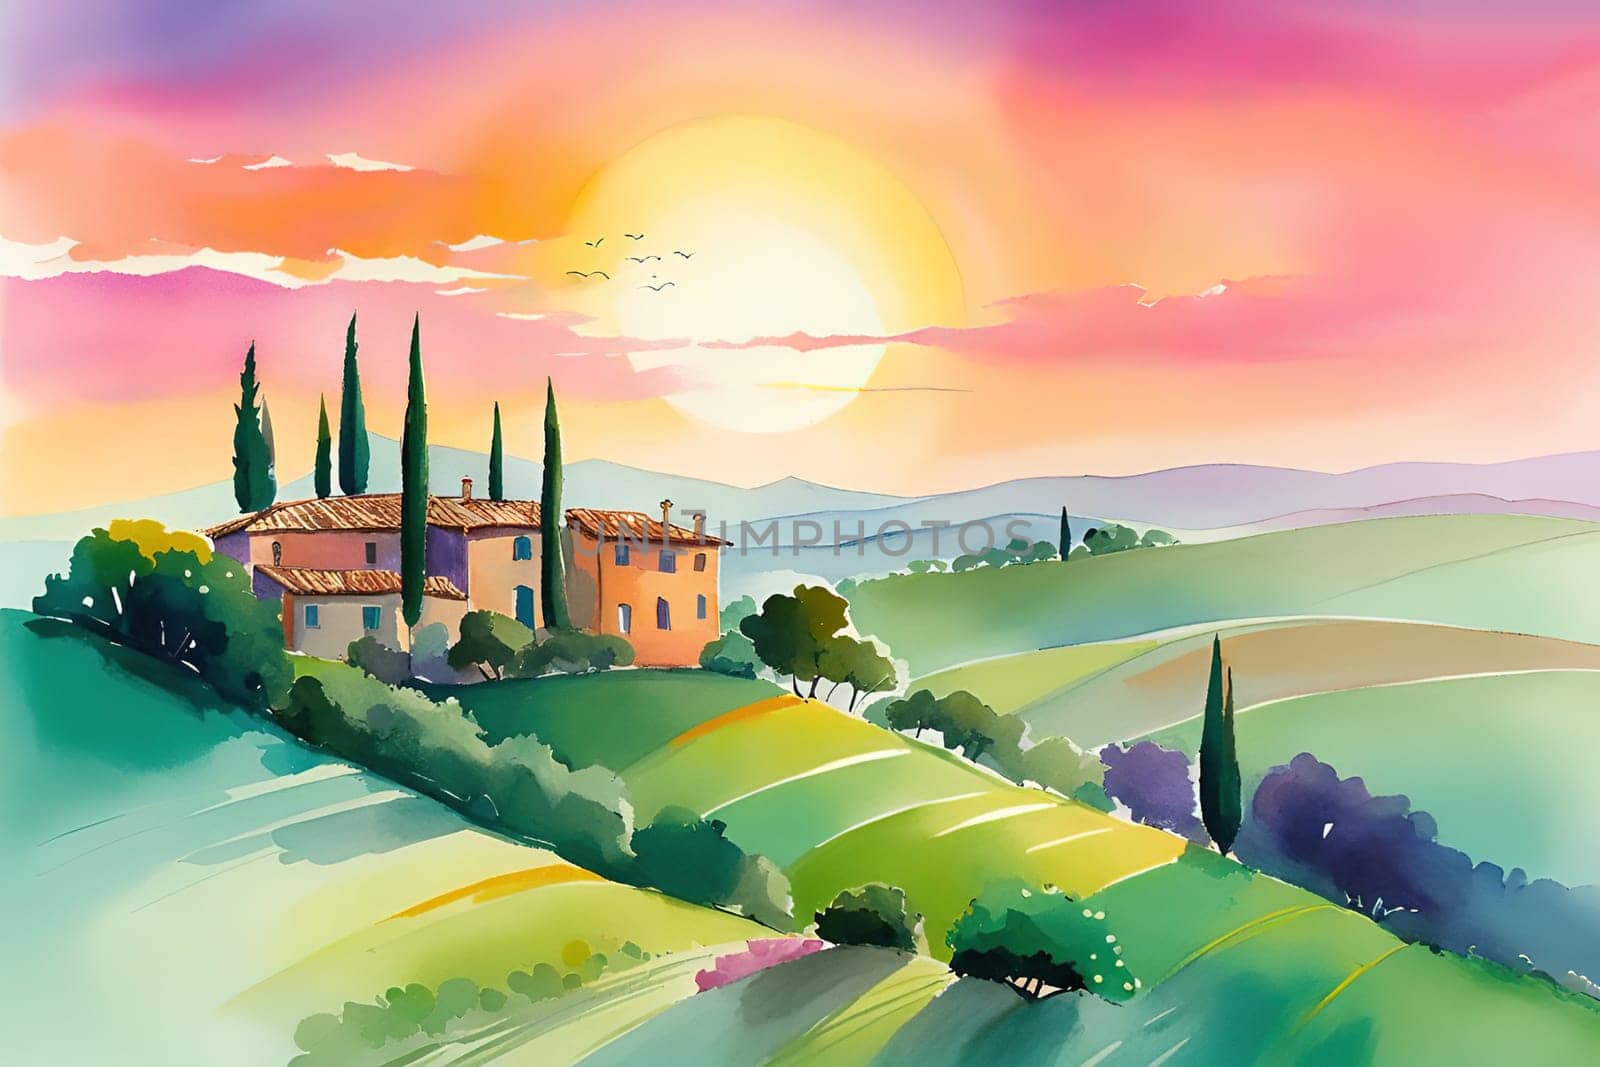 Tuscany landscape with sun, hills and village. Vector illustration. Tuscany landscape at sunset. Italy, Europe.